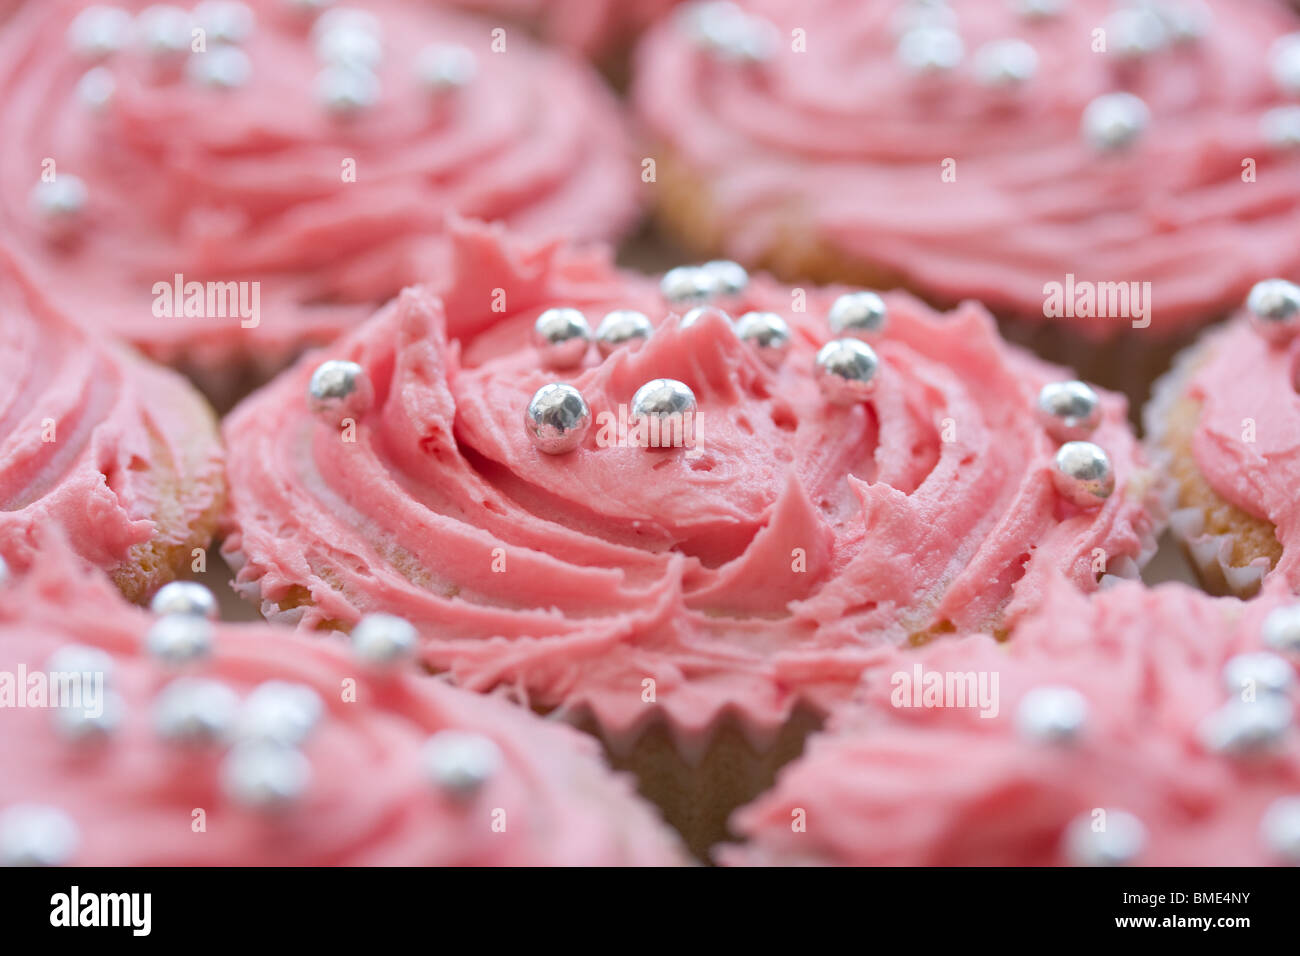 An array of decorated fairy cakes with a very shallow depth of field Stock Photo